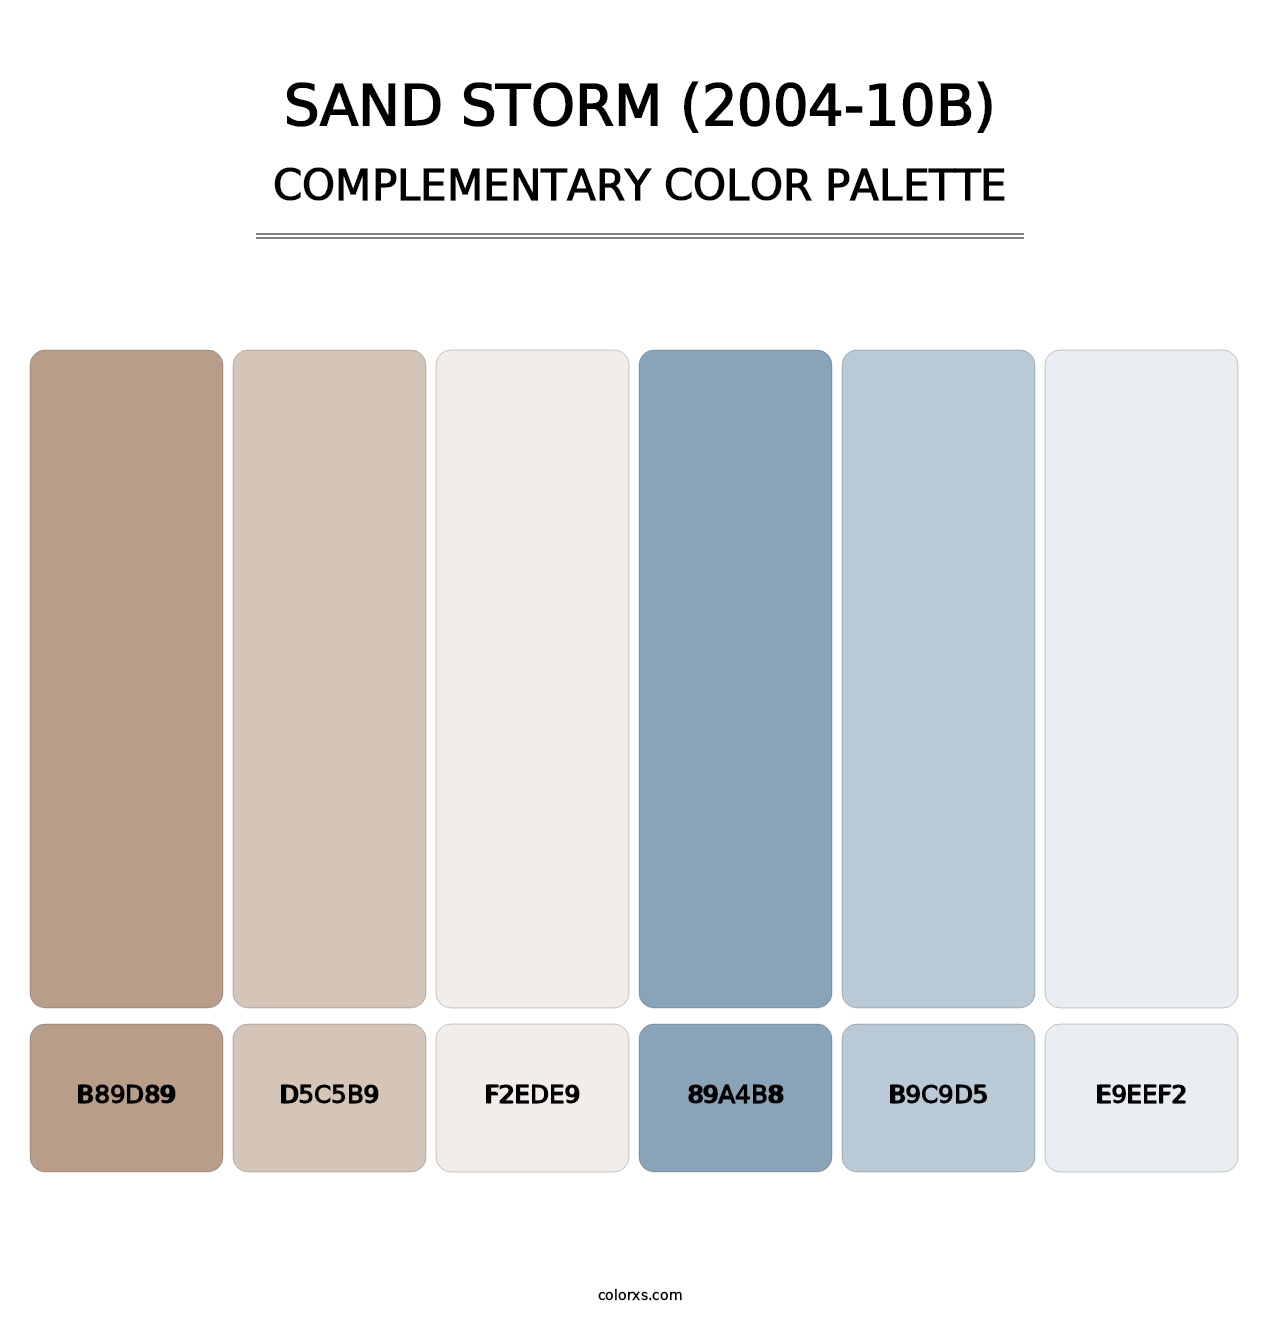 Sand Storm (2004-10B) - Complementary Color Palette